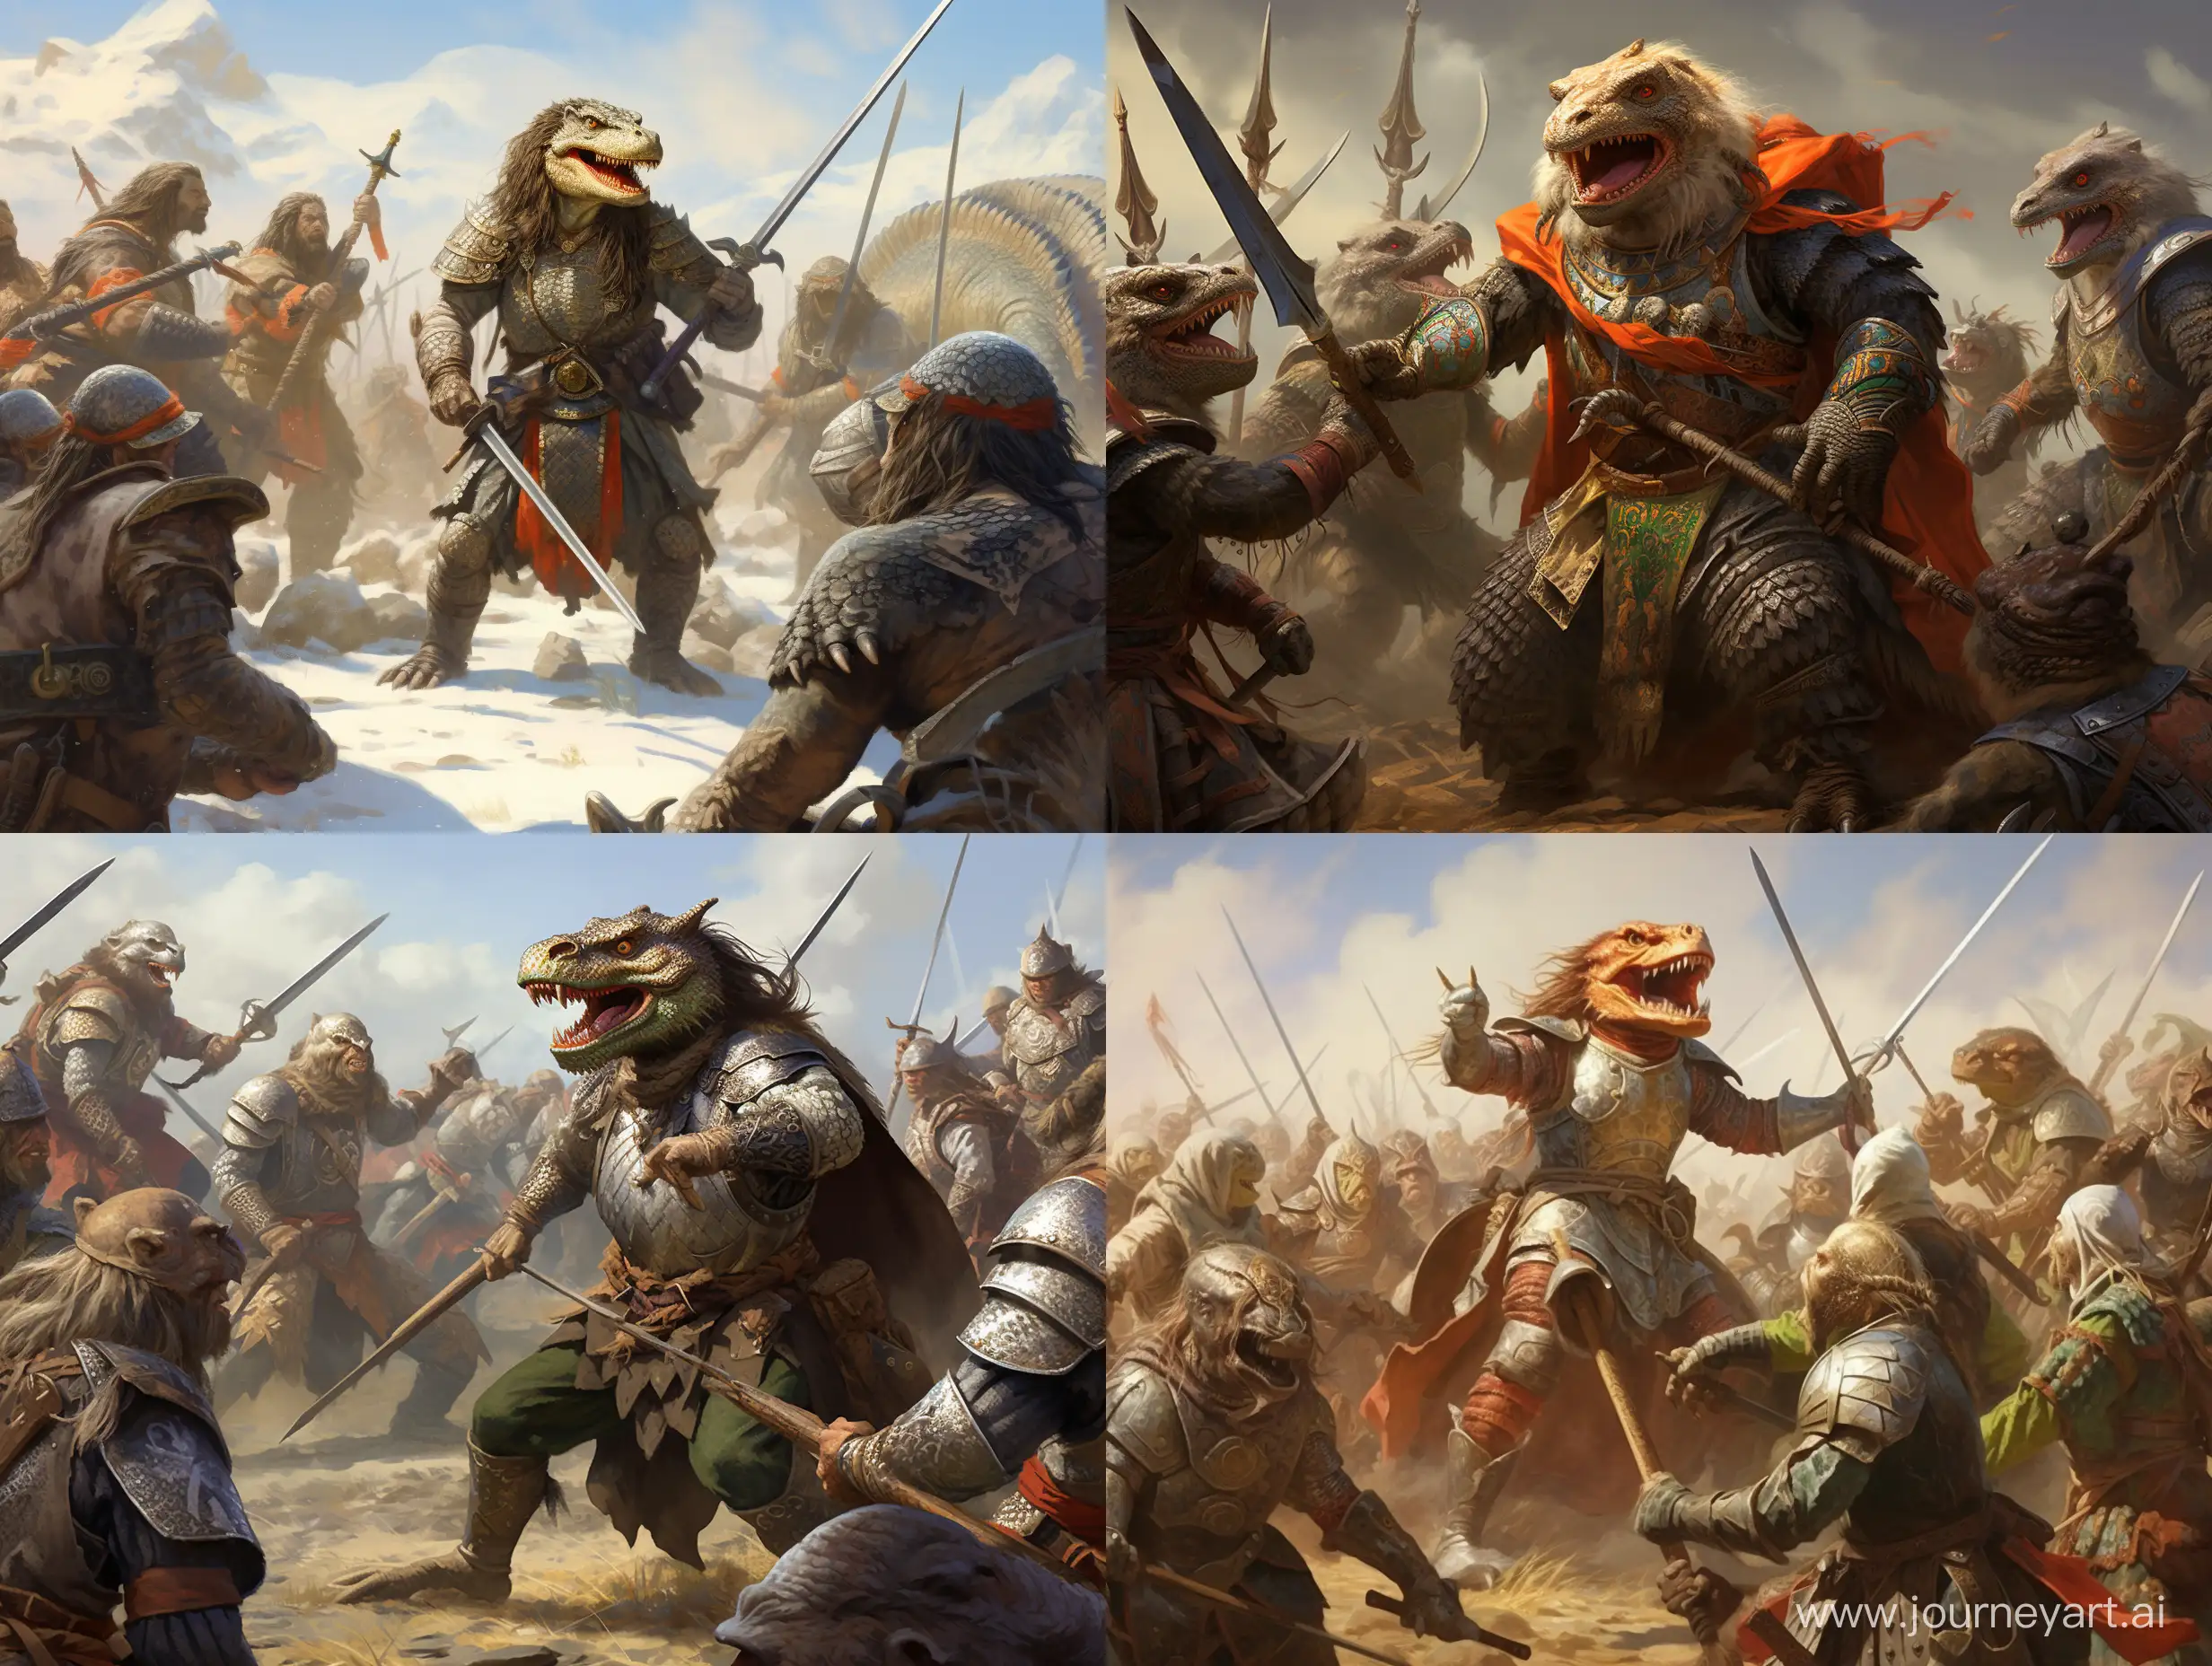 Epic-Battle-of-Ancient-Rus-Warriors-and-Anthropomorphic-Lizards